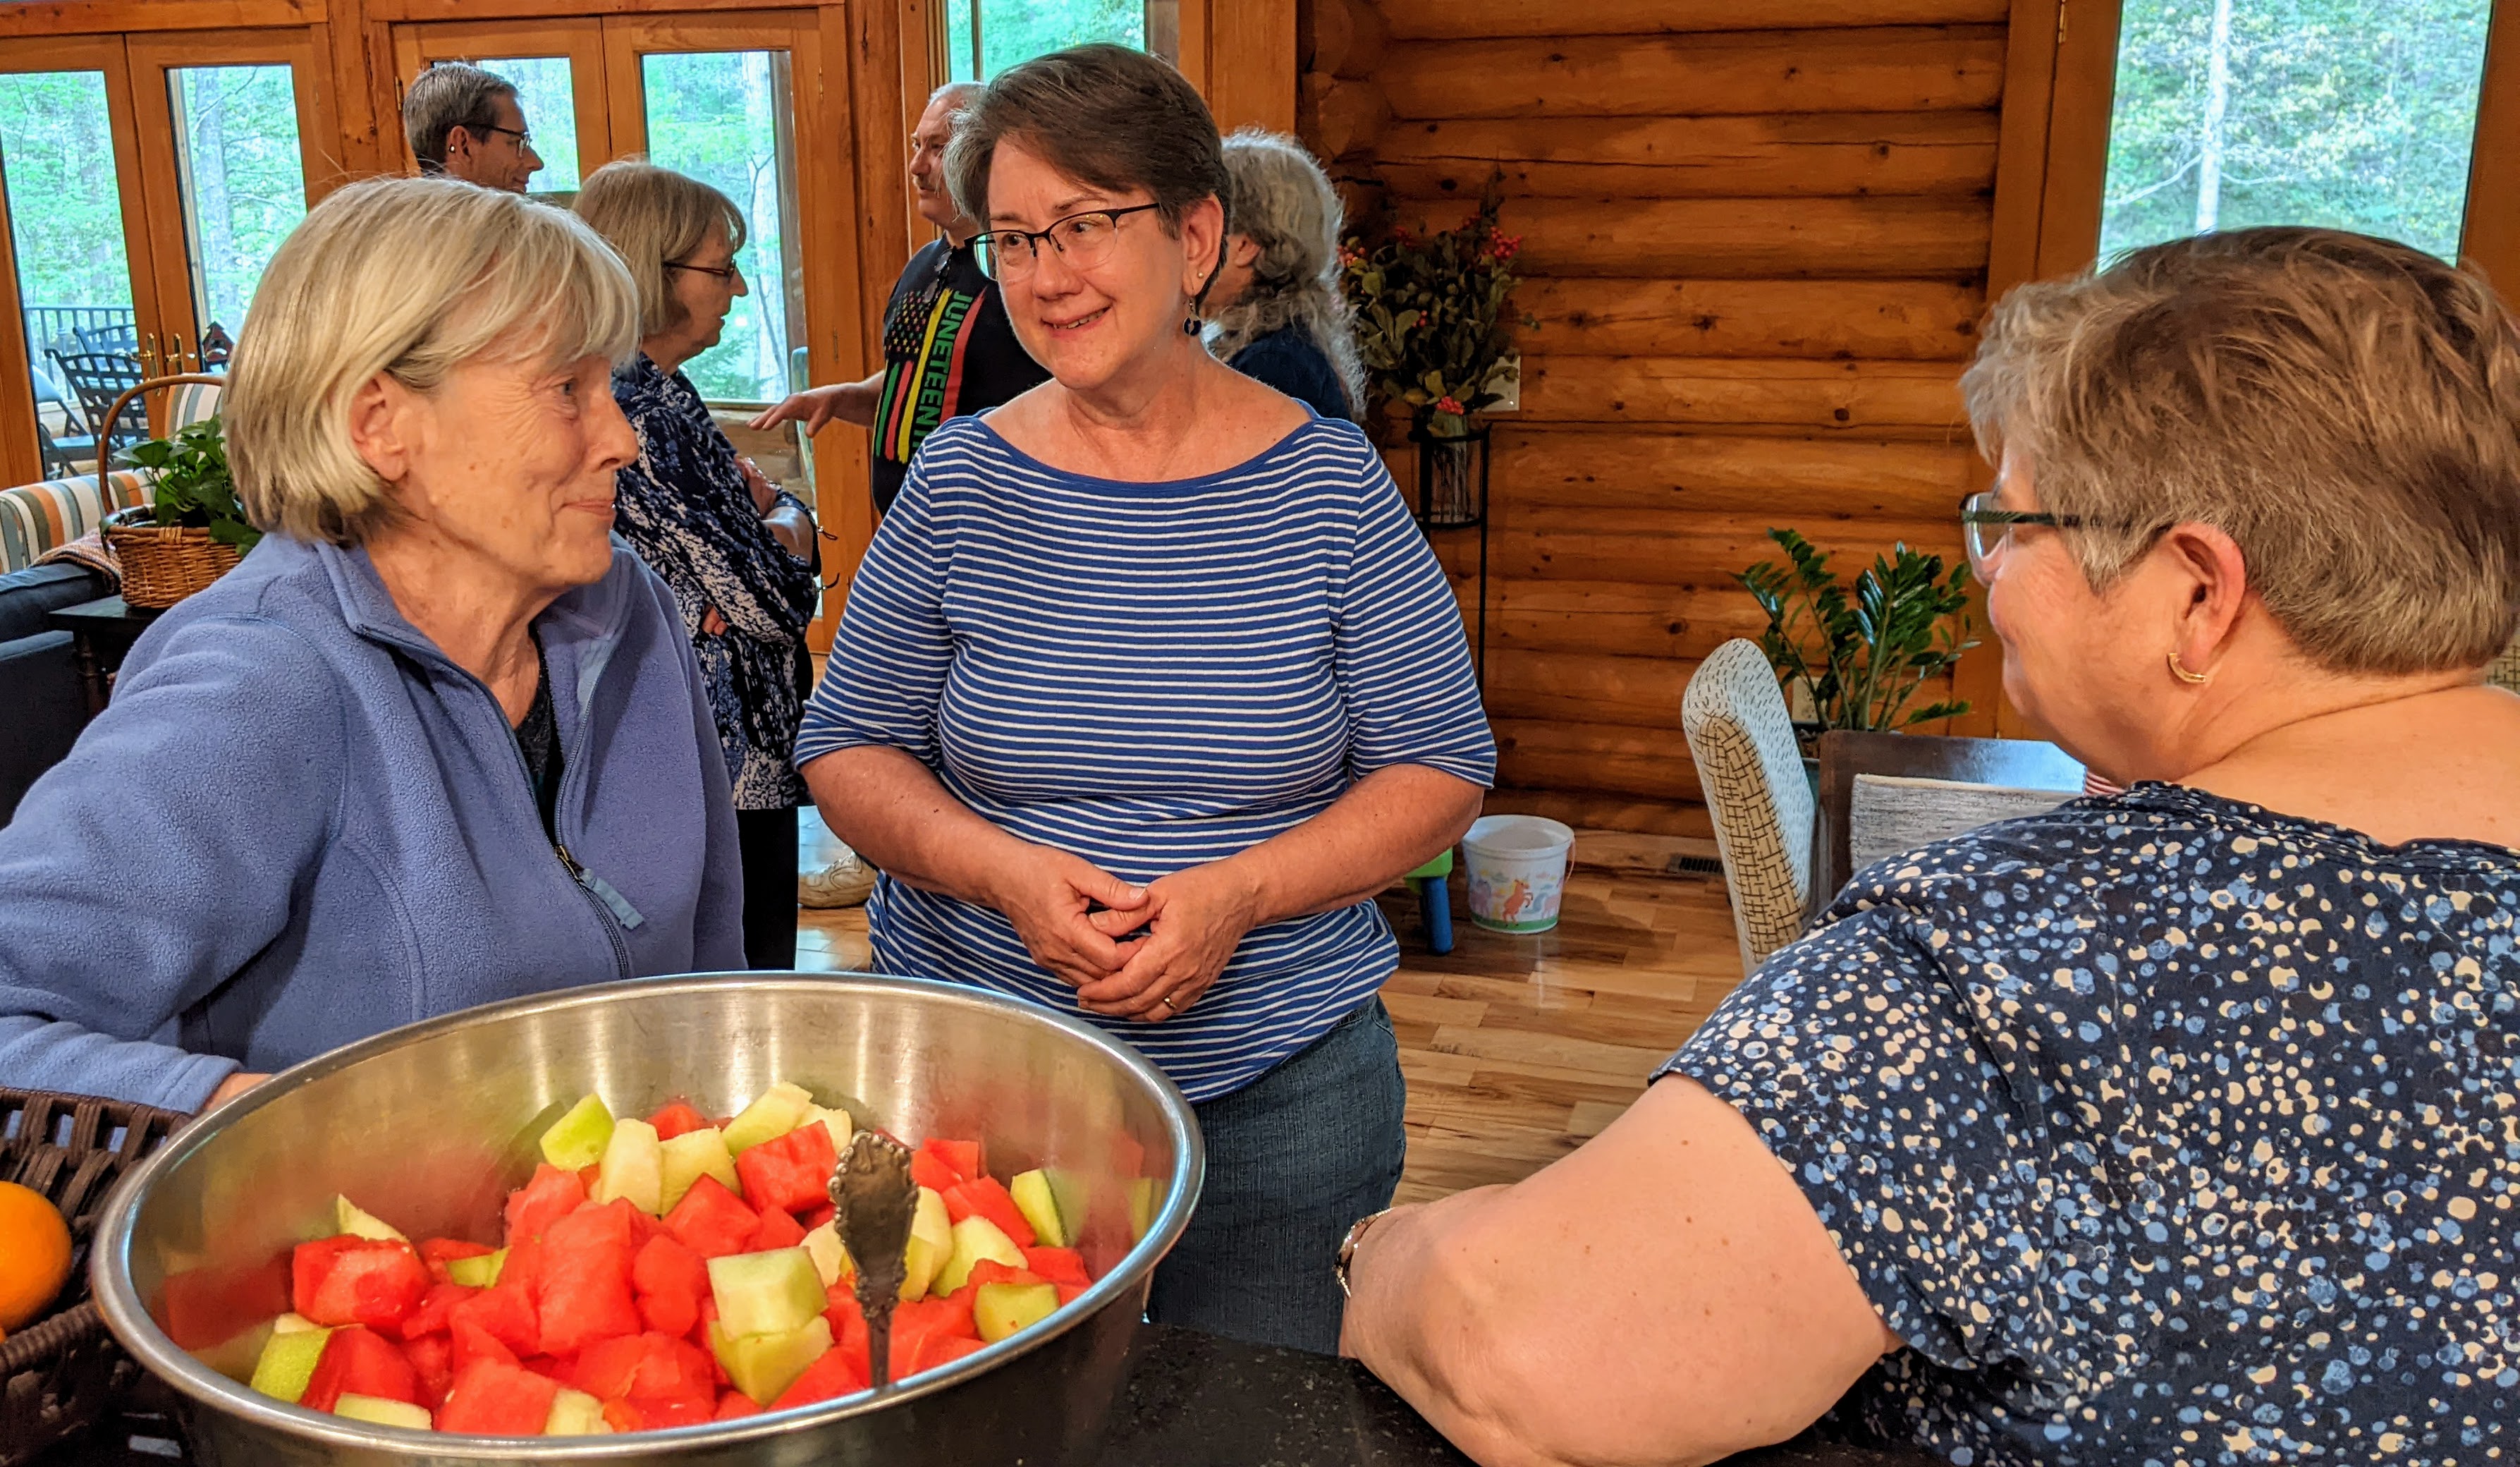 Three women inside talkin with each other, beside a large bowl of fruit salad.